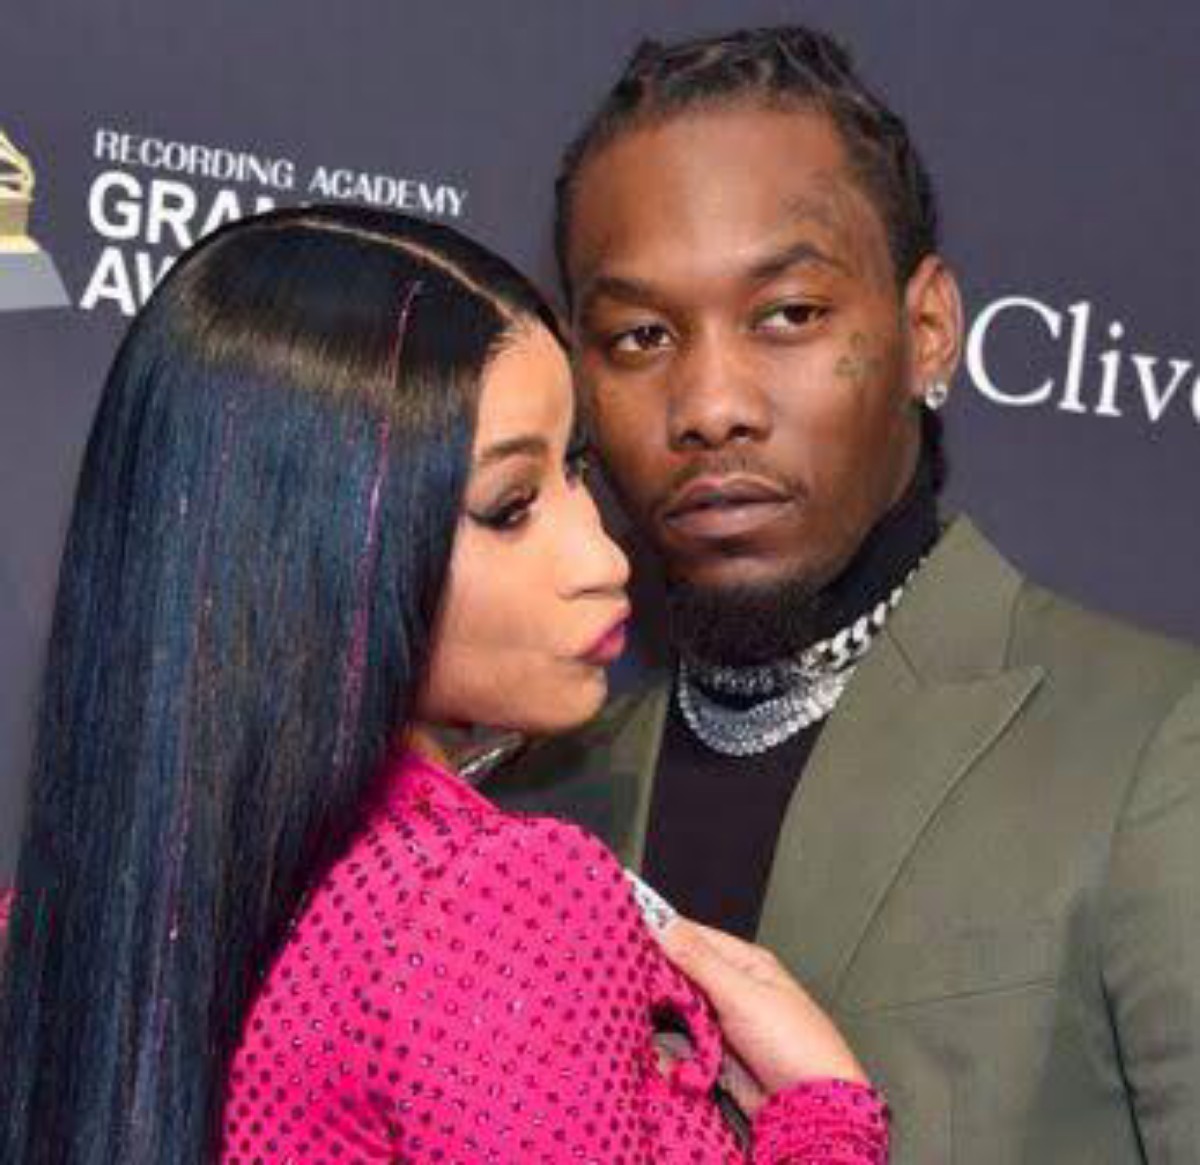 Cardi B & Offset Reveal Their Son’s Name, With First Photos